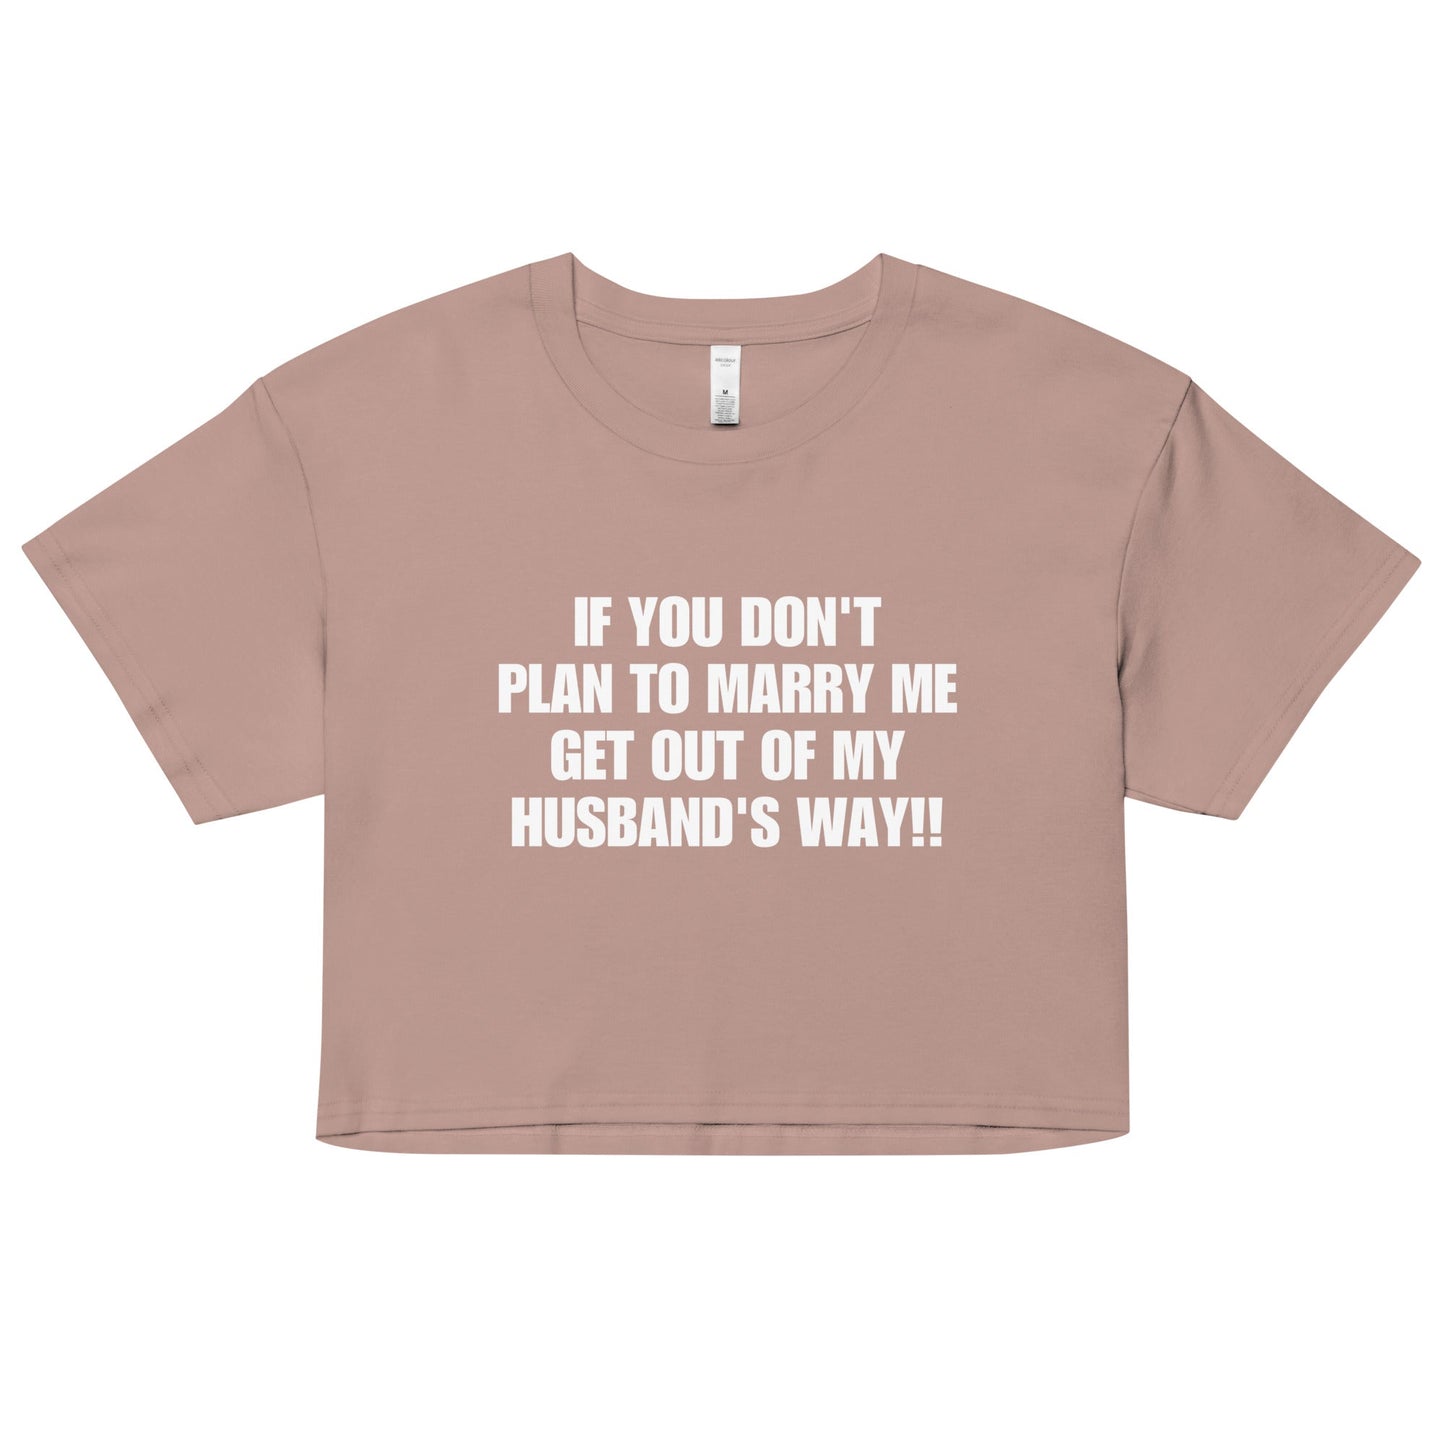 If You Don't Plan To Marry Me.. Get Out Of My Husband's Way Women’s crop top - Catch This Tea Shirts